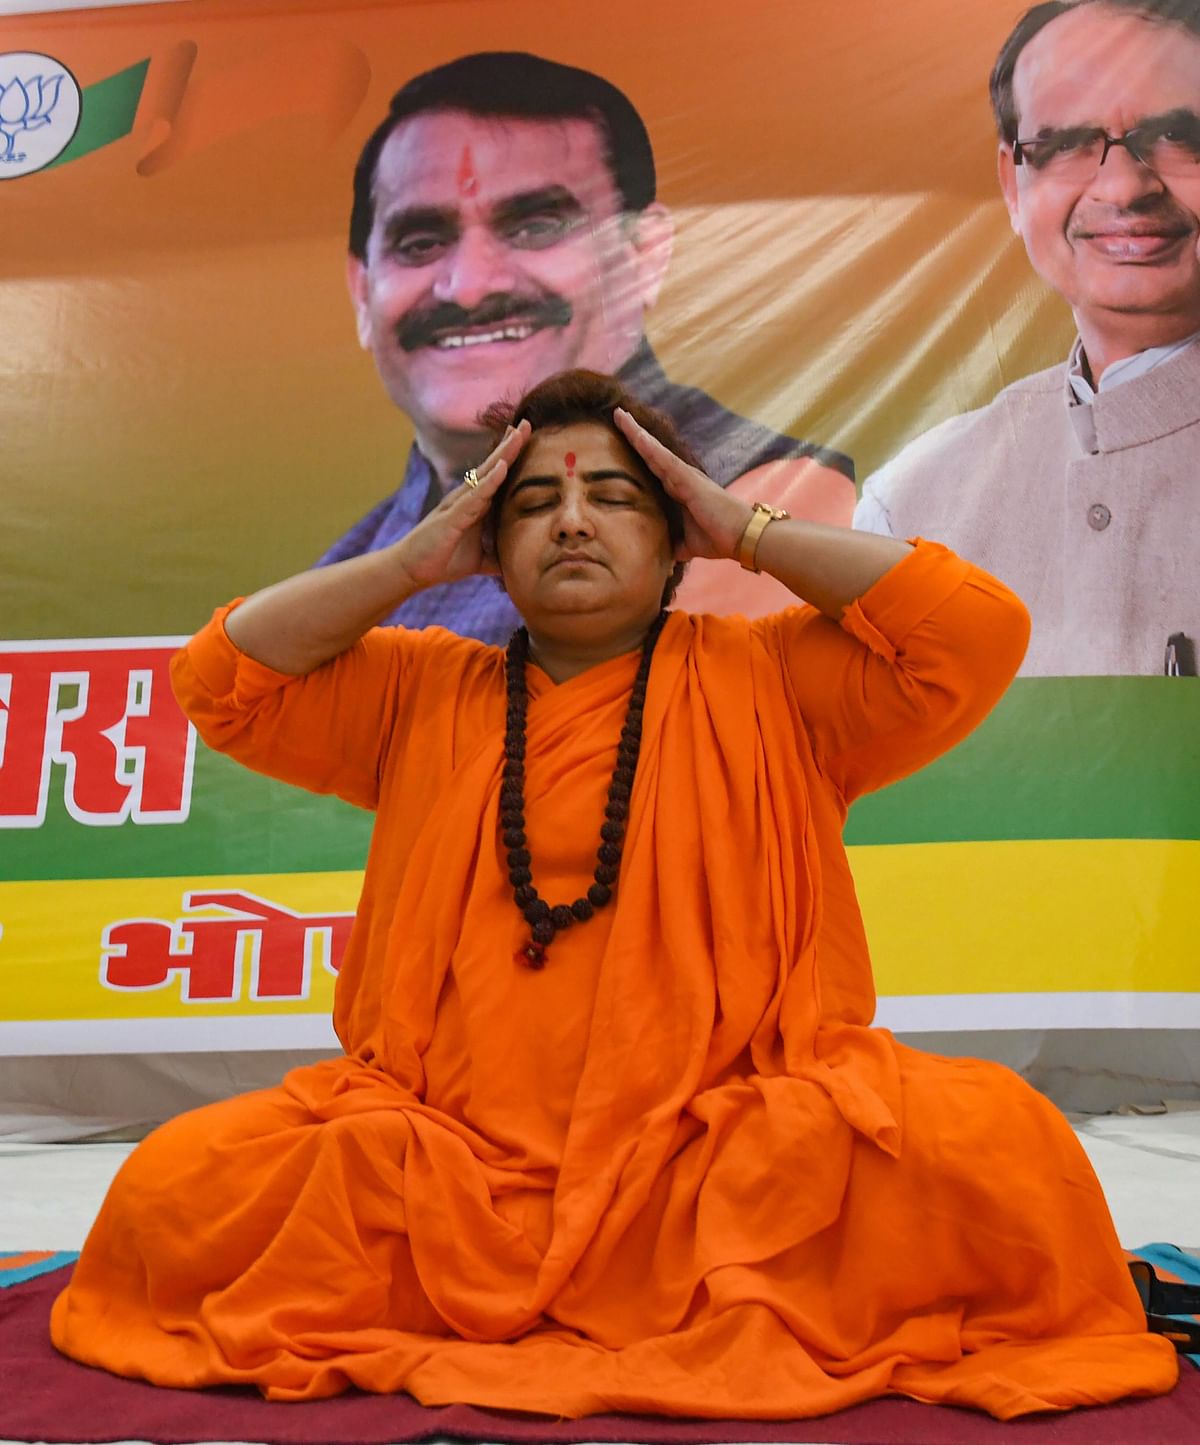 Facing health issues due to 'torture' by Congress, claims Pragya Thakur